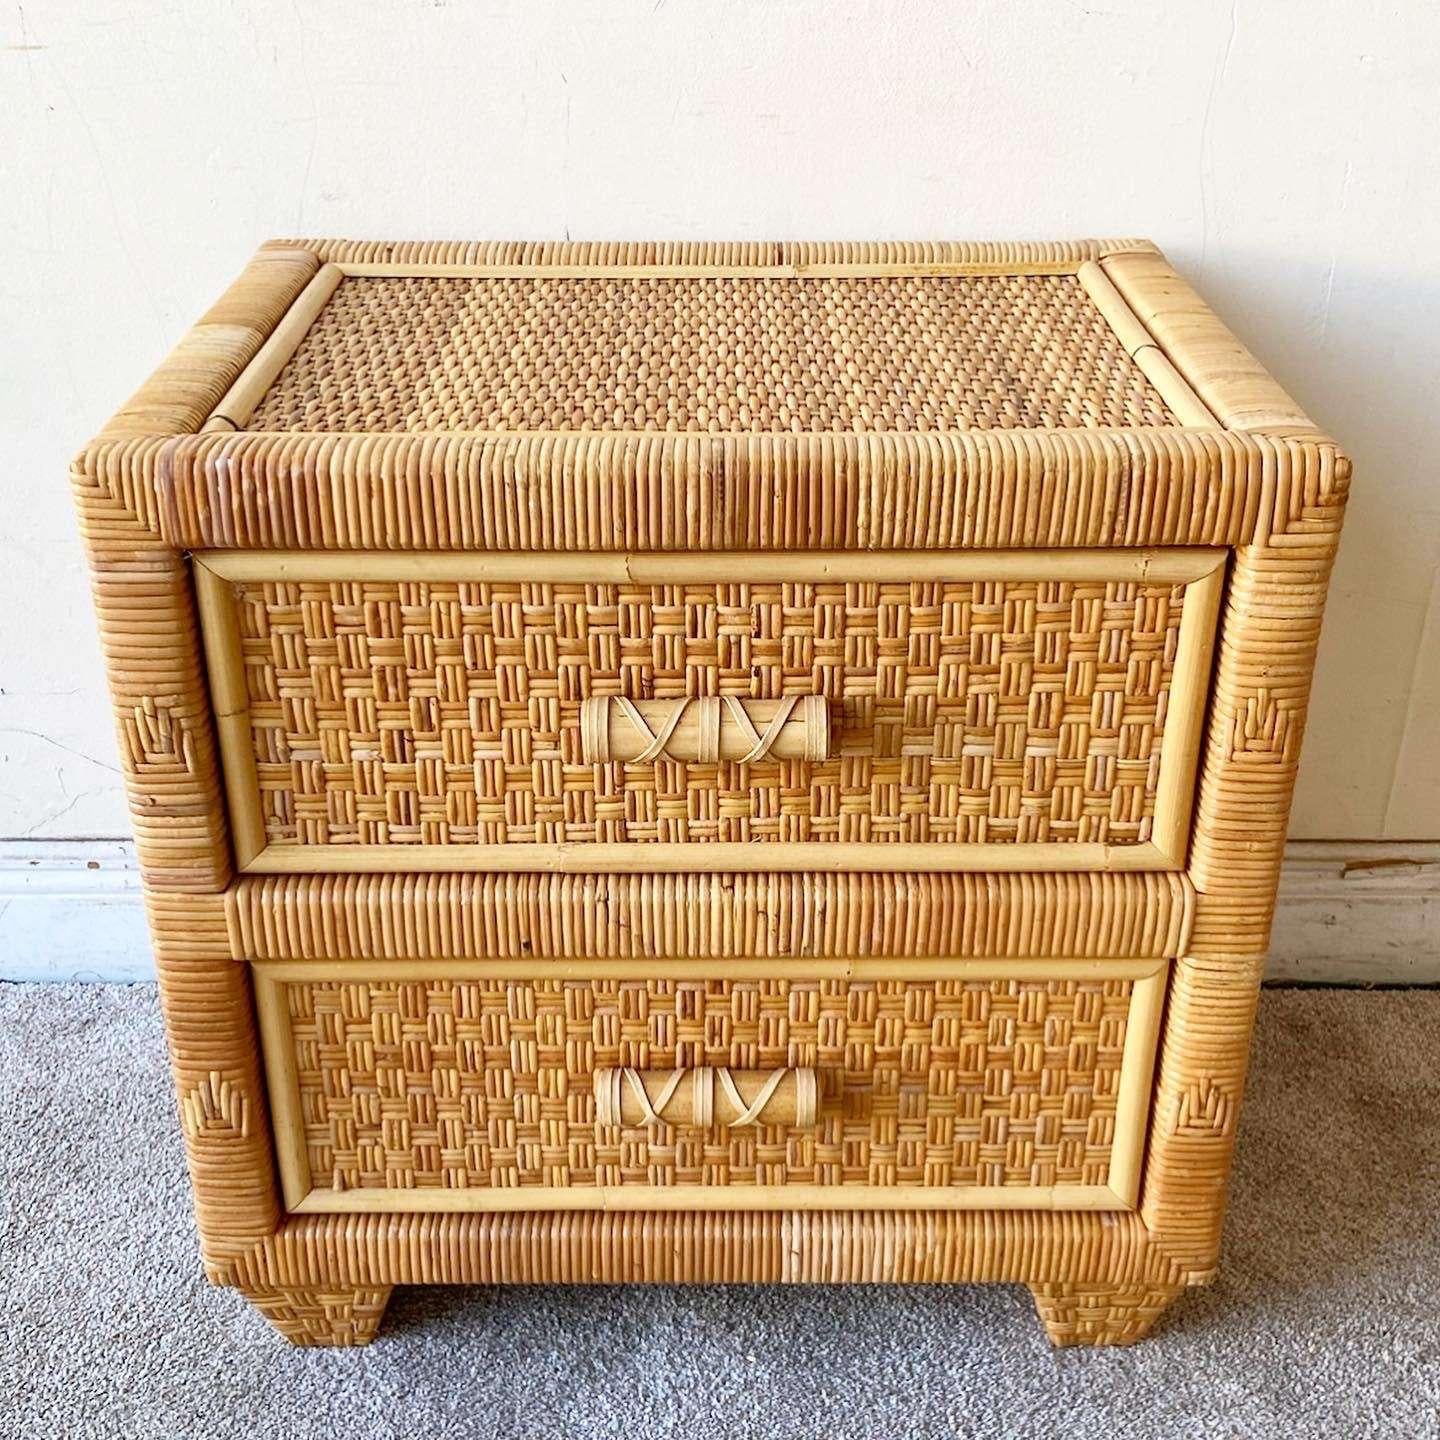 Exceptional vintage bohemian nighstands. Features a rattan frame with wicker paneling.